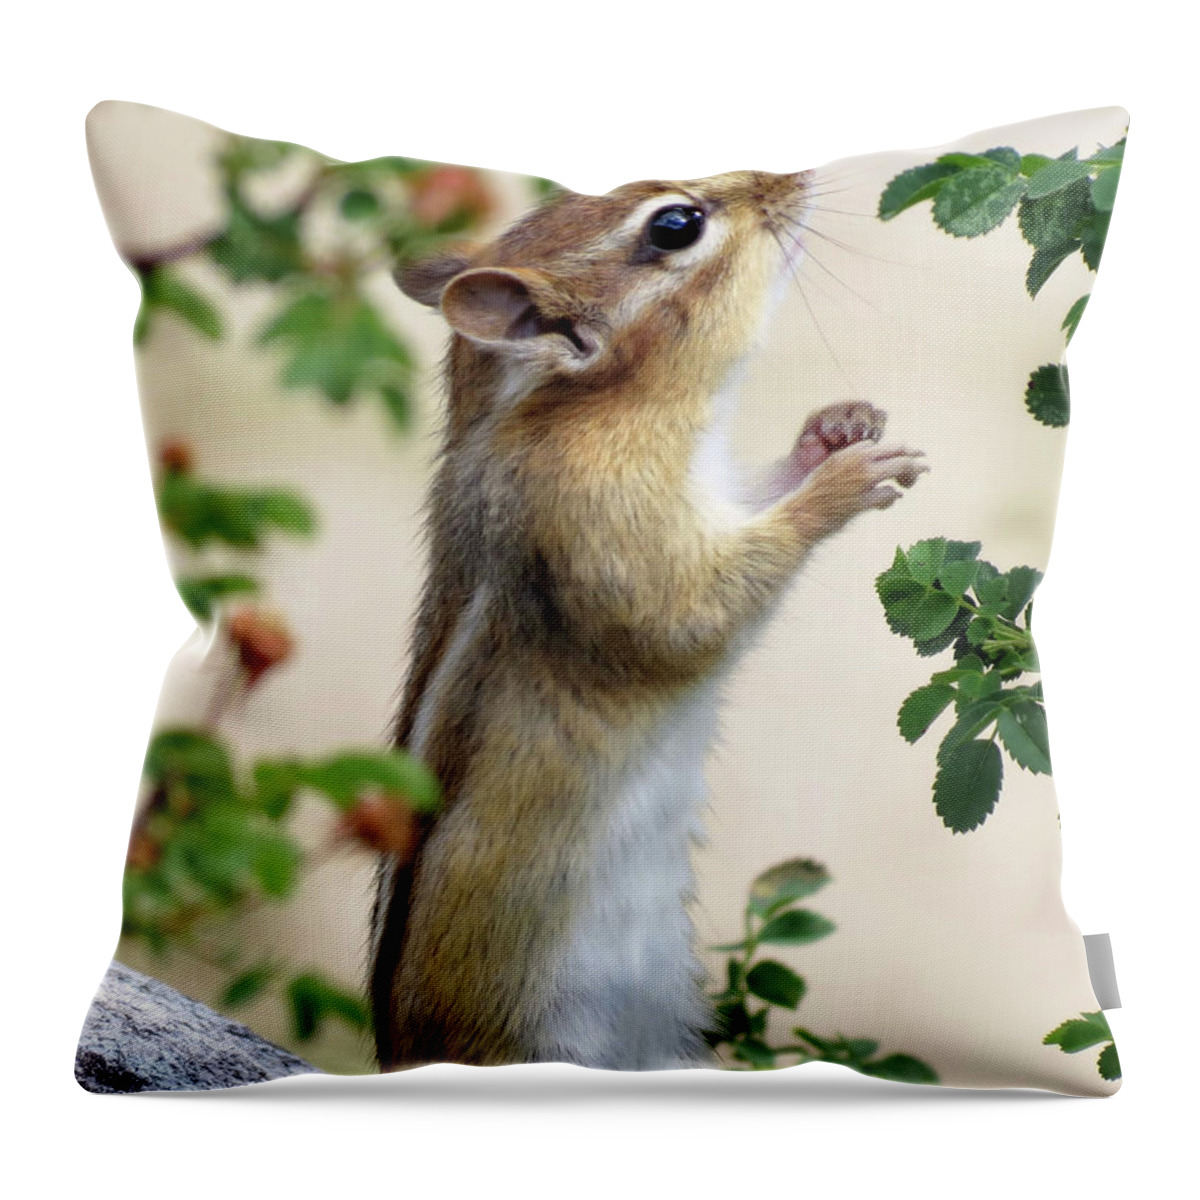  Animal Throw Pillow featuring the photograph Within Reach - Chipmunk by MTBobbins Photography